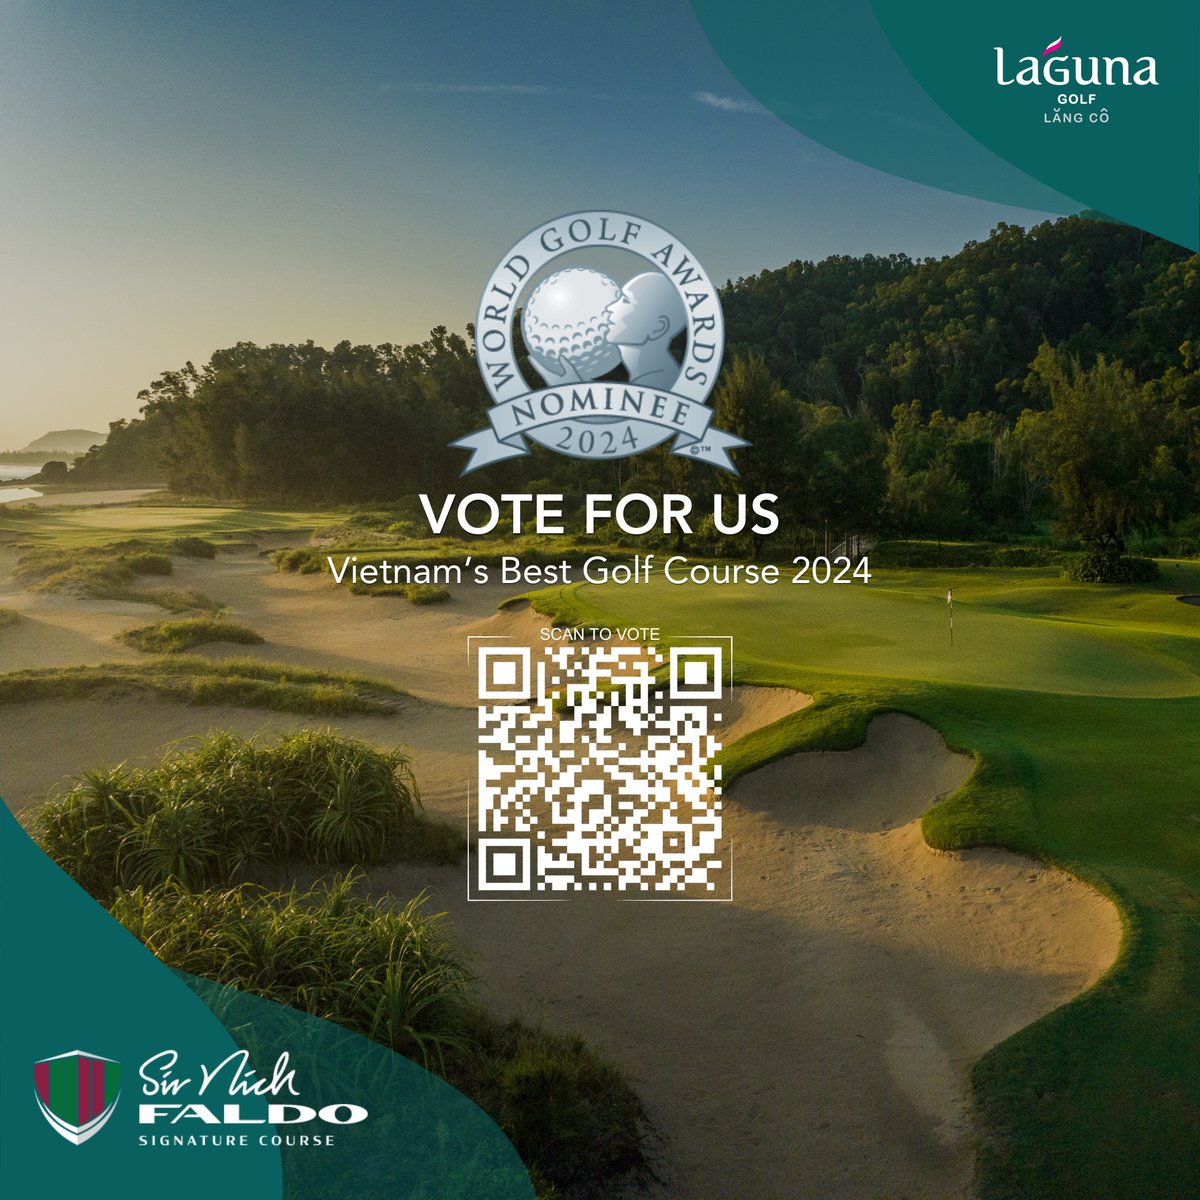 VOTE FOR US - VIETNAM’S BEST GOLF COURSE 2024 Proudly nominated again for 'Vietnam's Best Golf Course' by the prestigious World Golf Awards, Laguna Golf Lăng Cô celebrates our continuous effort to deliver an exceptional golf experience.